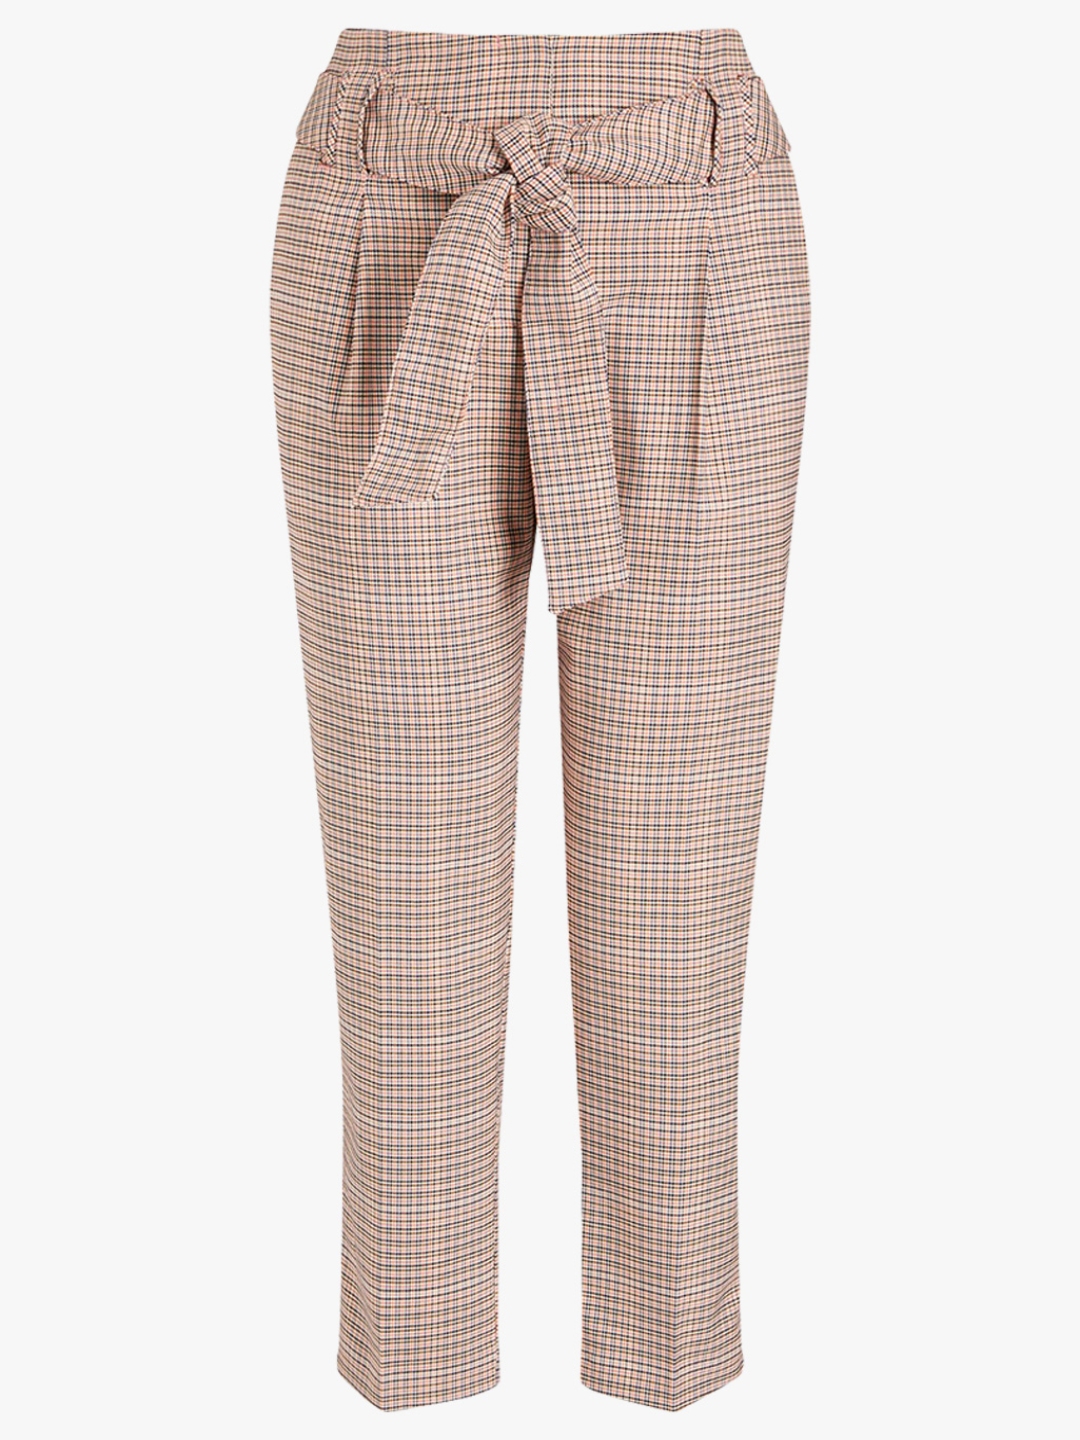 Buy Check Formal Trousers from Next